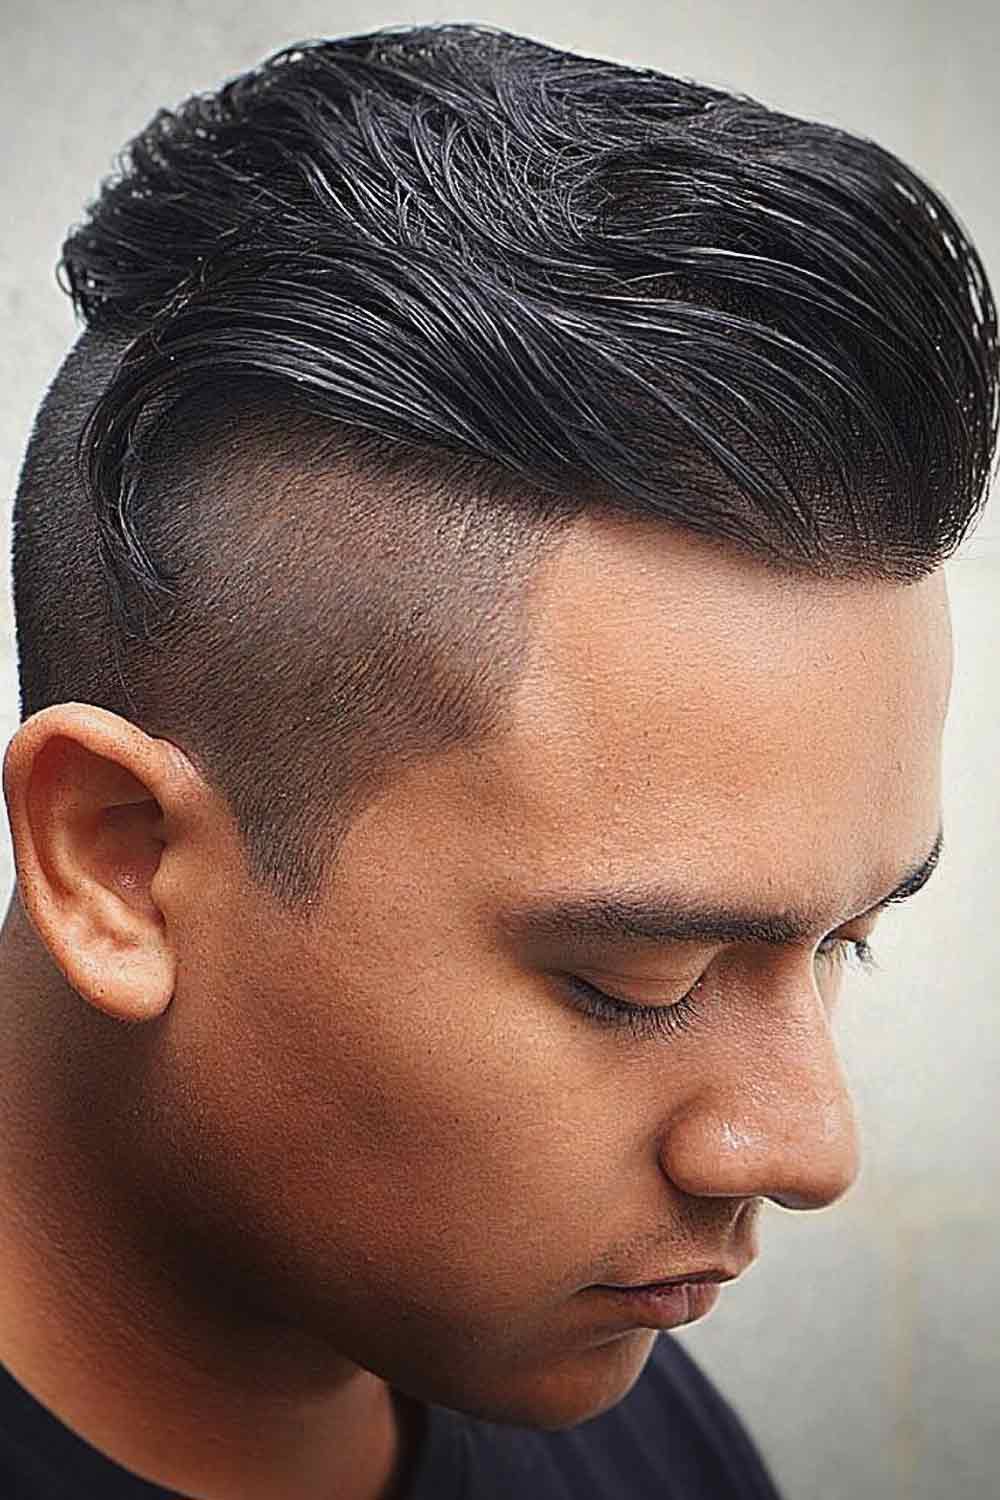 15 Best Hairstyles For Men With Round Faces in 2023